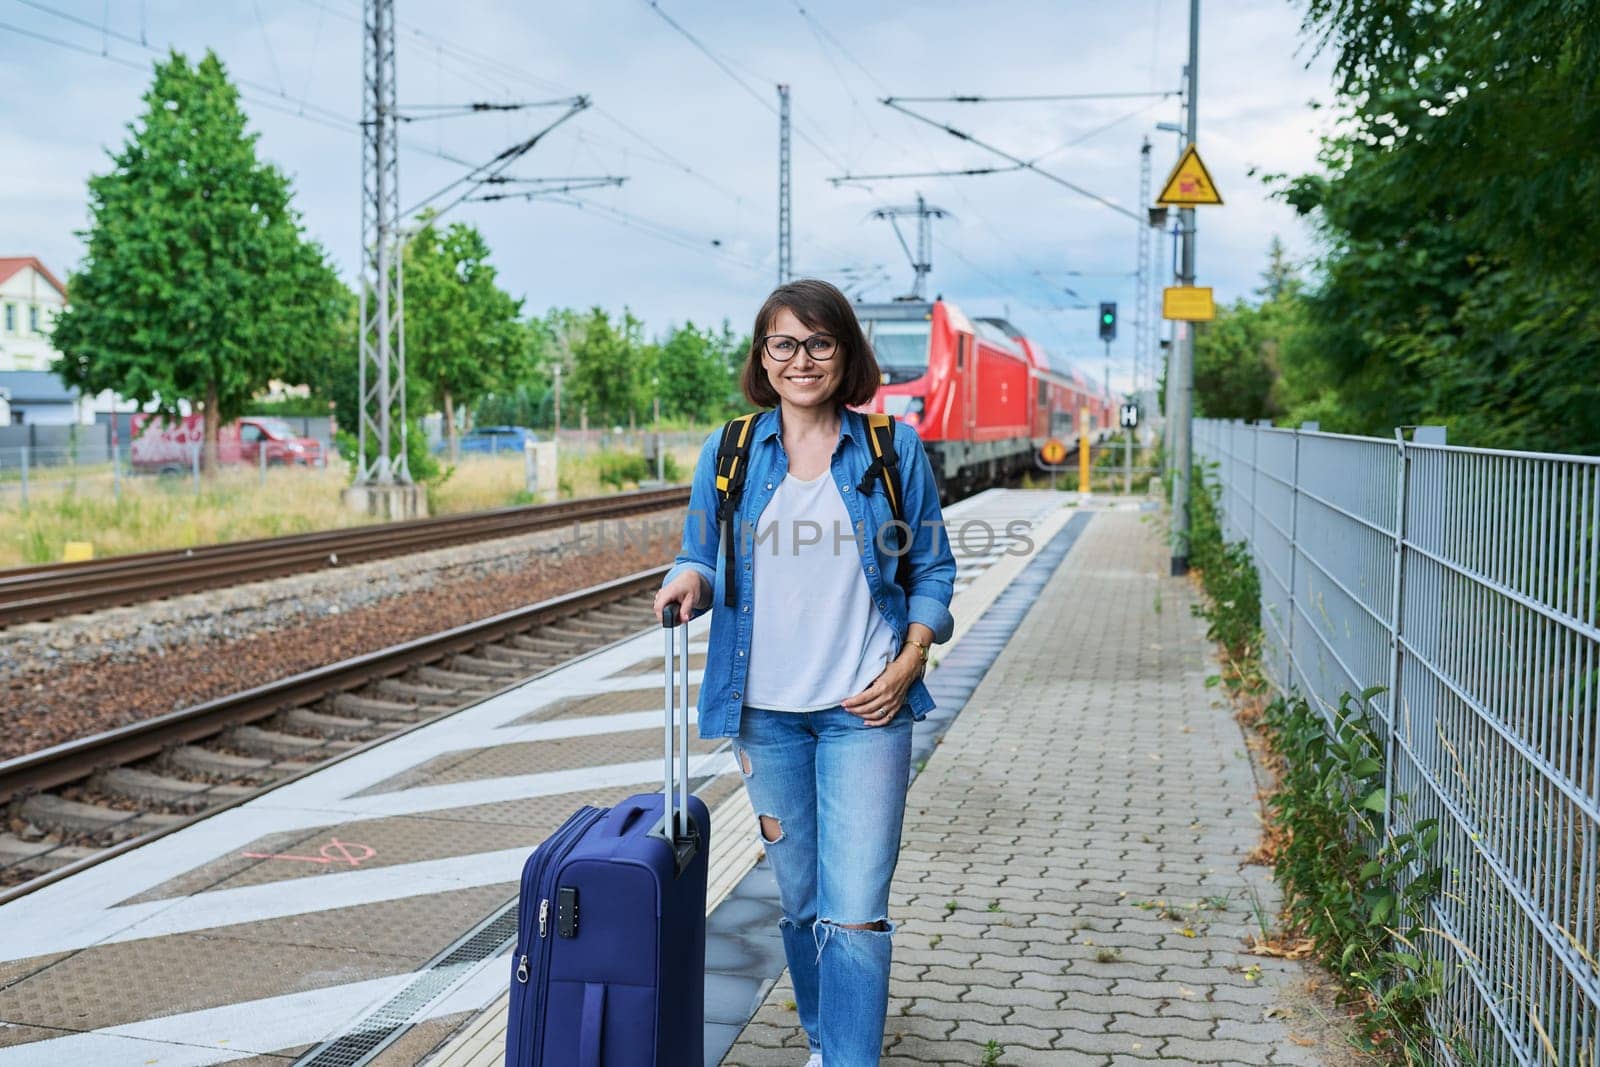 Middle aged smiling woman with suitcase backpack on outdoor platform of railway station, looking at camera, against backdrop of red electro train. Transport, journey, vacation, tourism, people concept